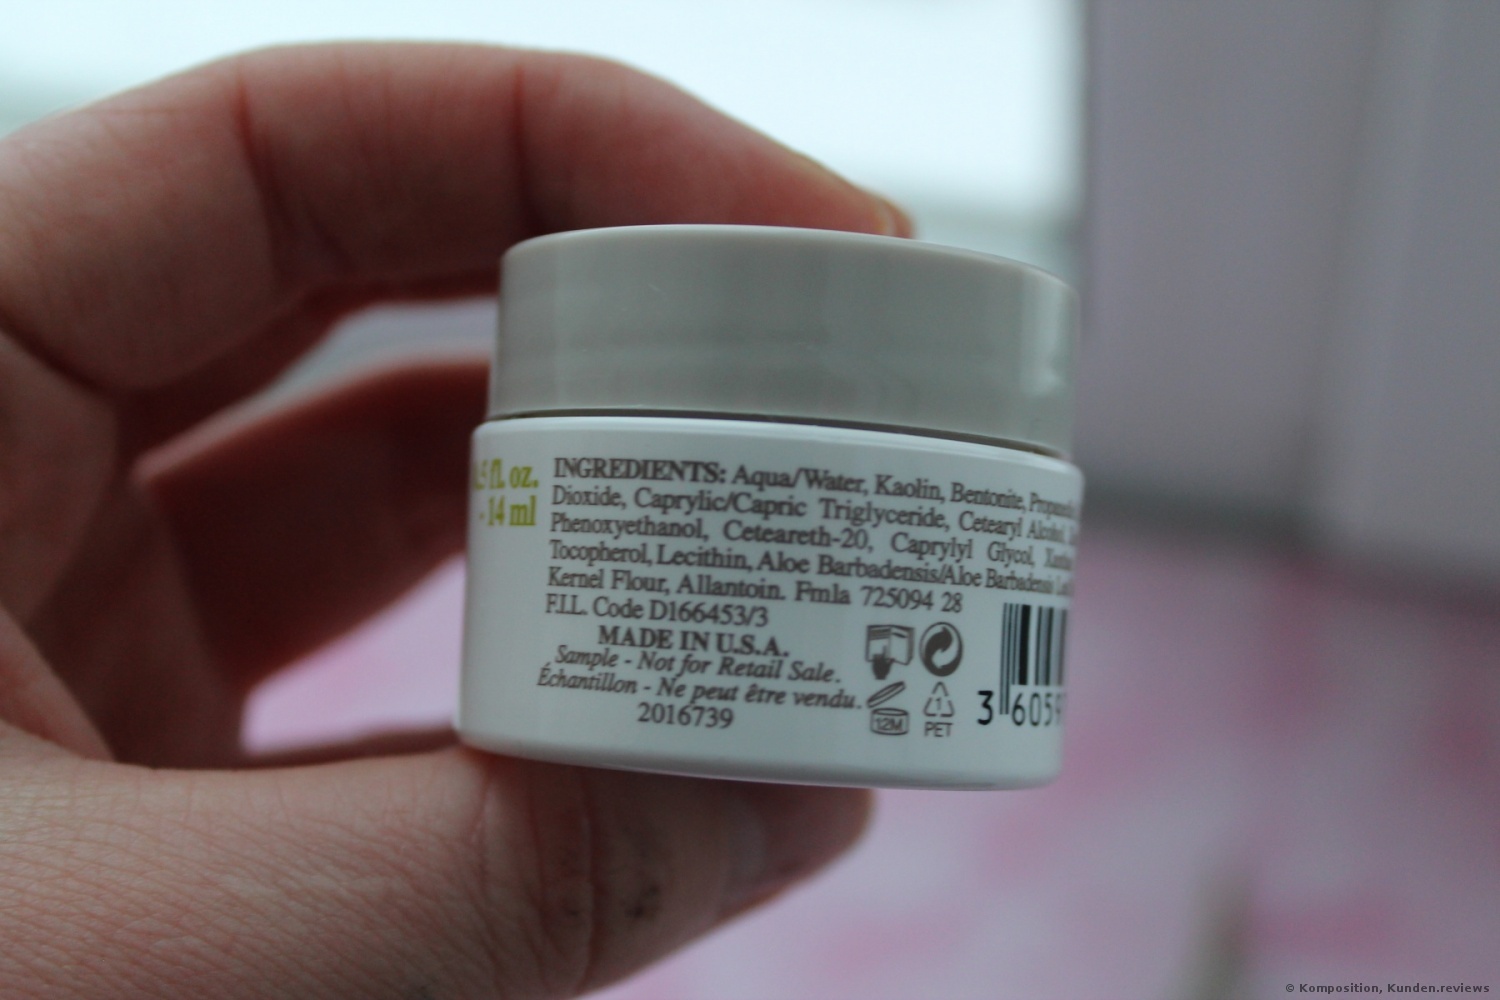  Kiehl's  Rare Earth Pore Cleansing Masque